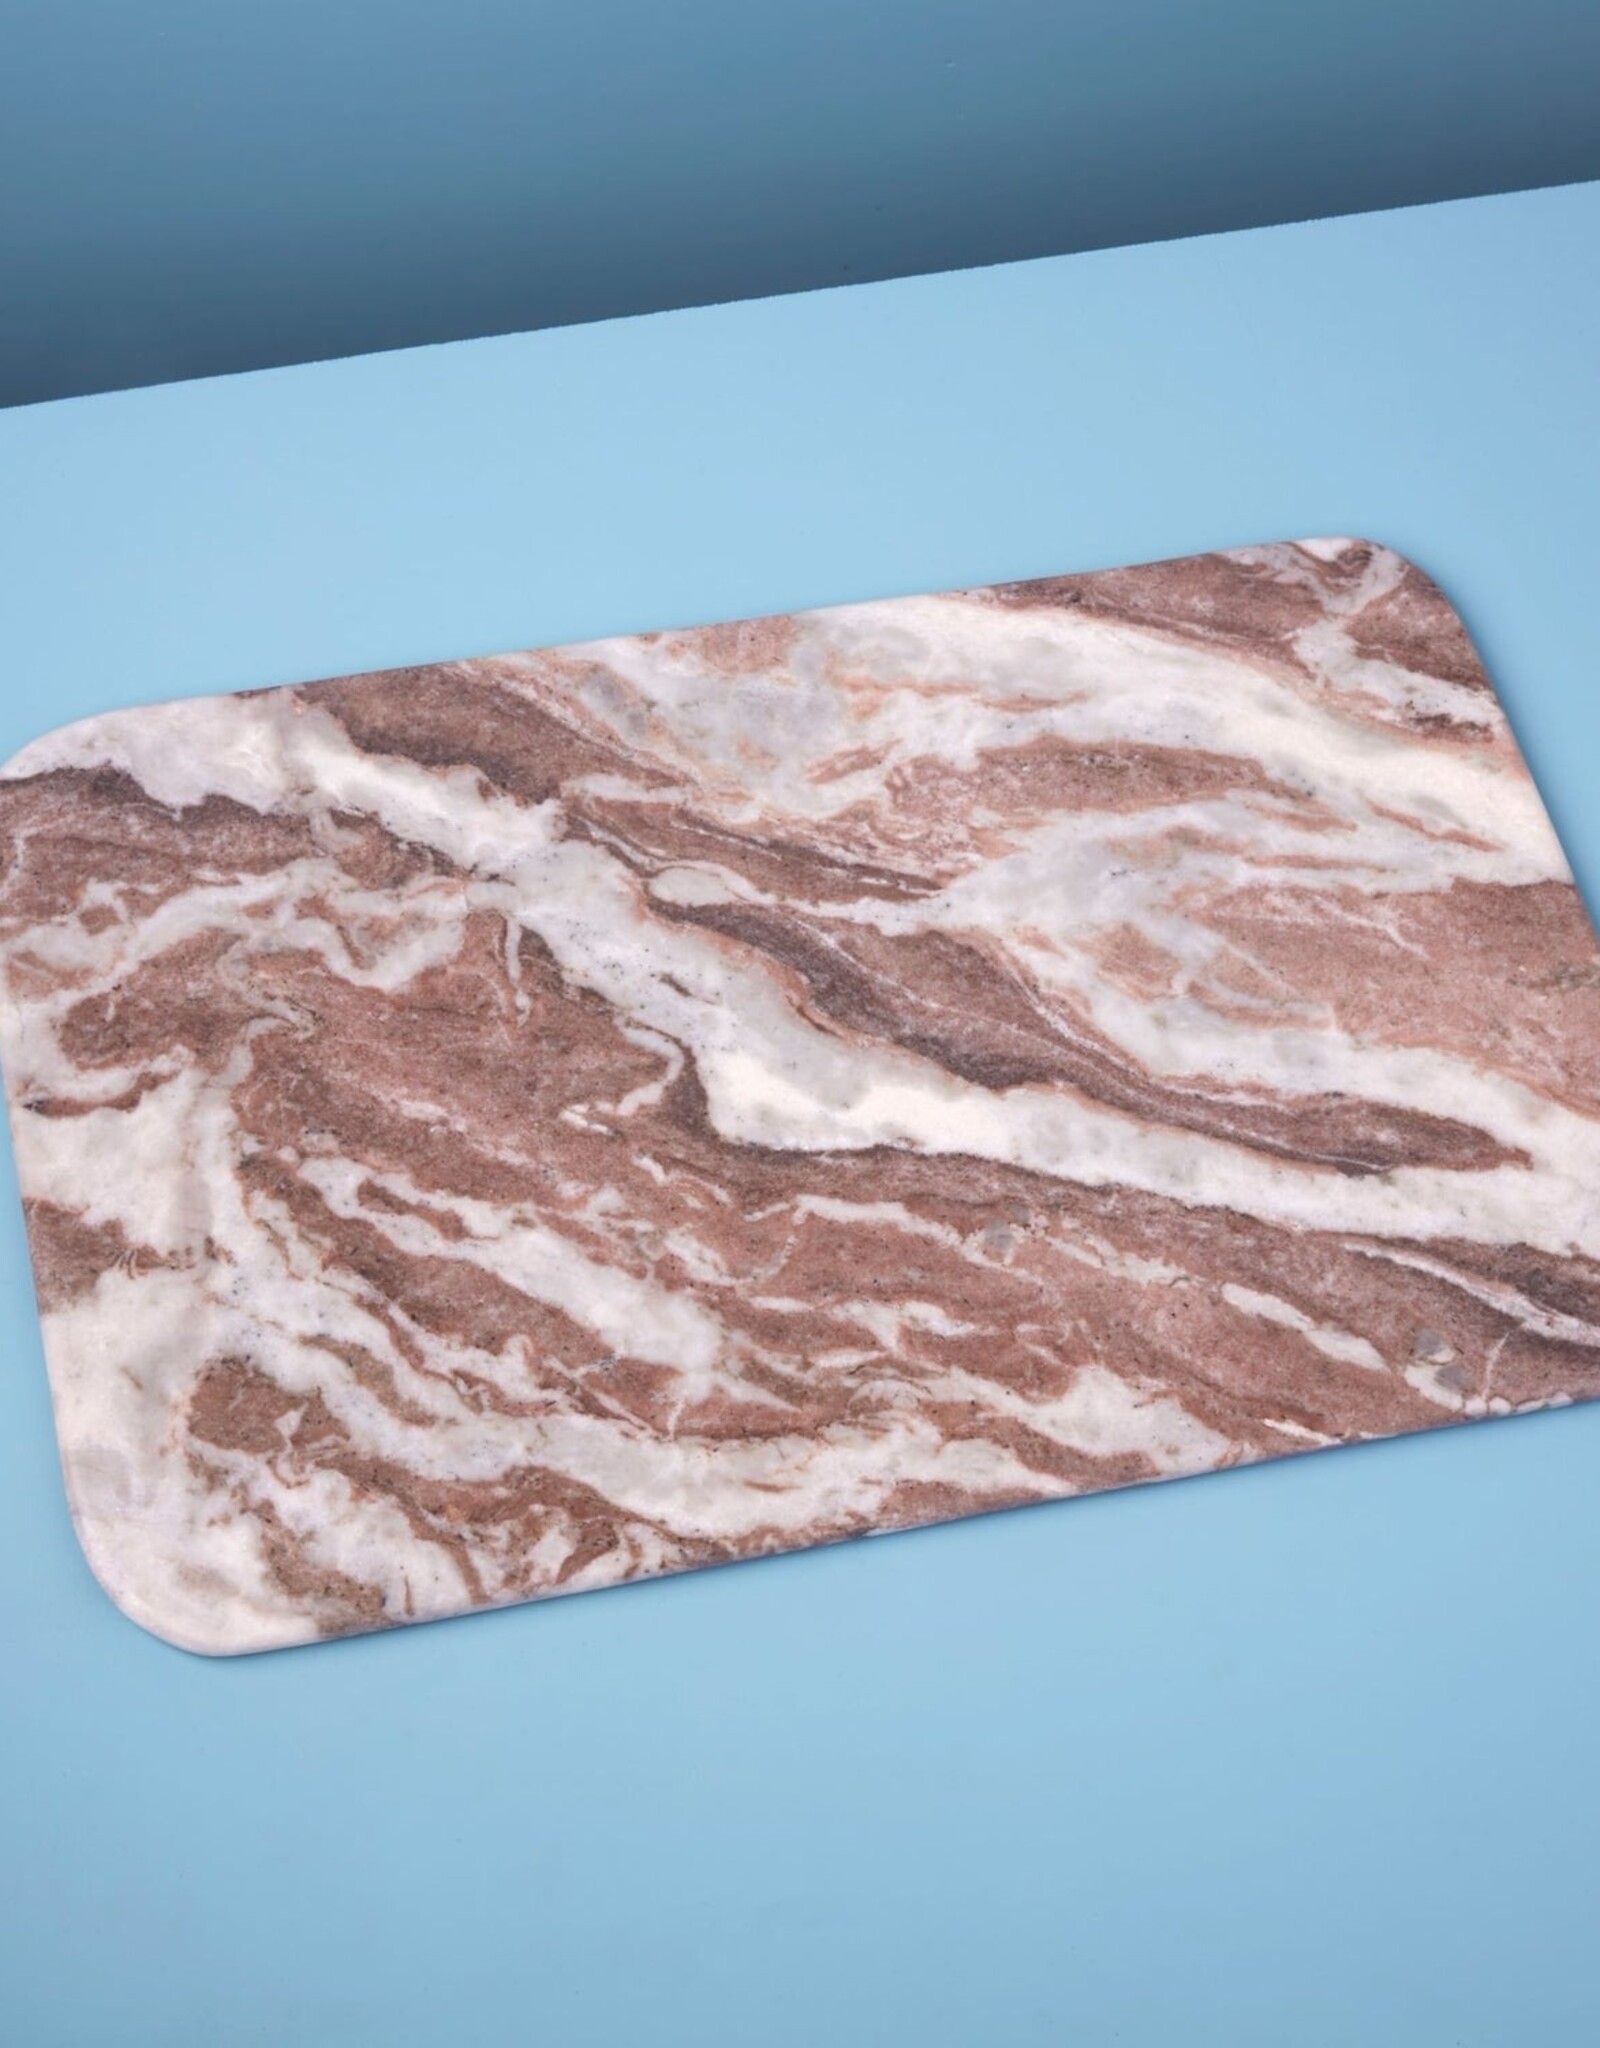 Be Home Waterfall Marble Pastry Slab